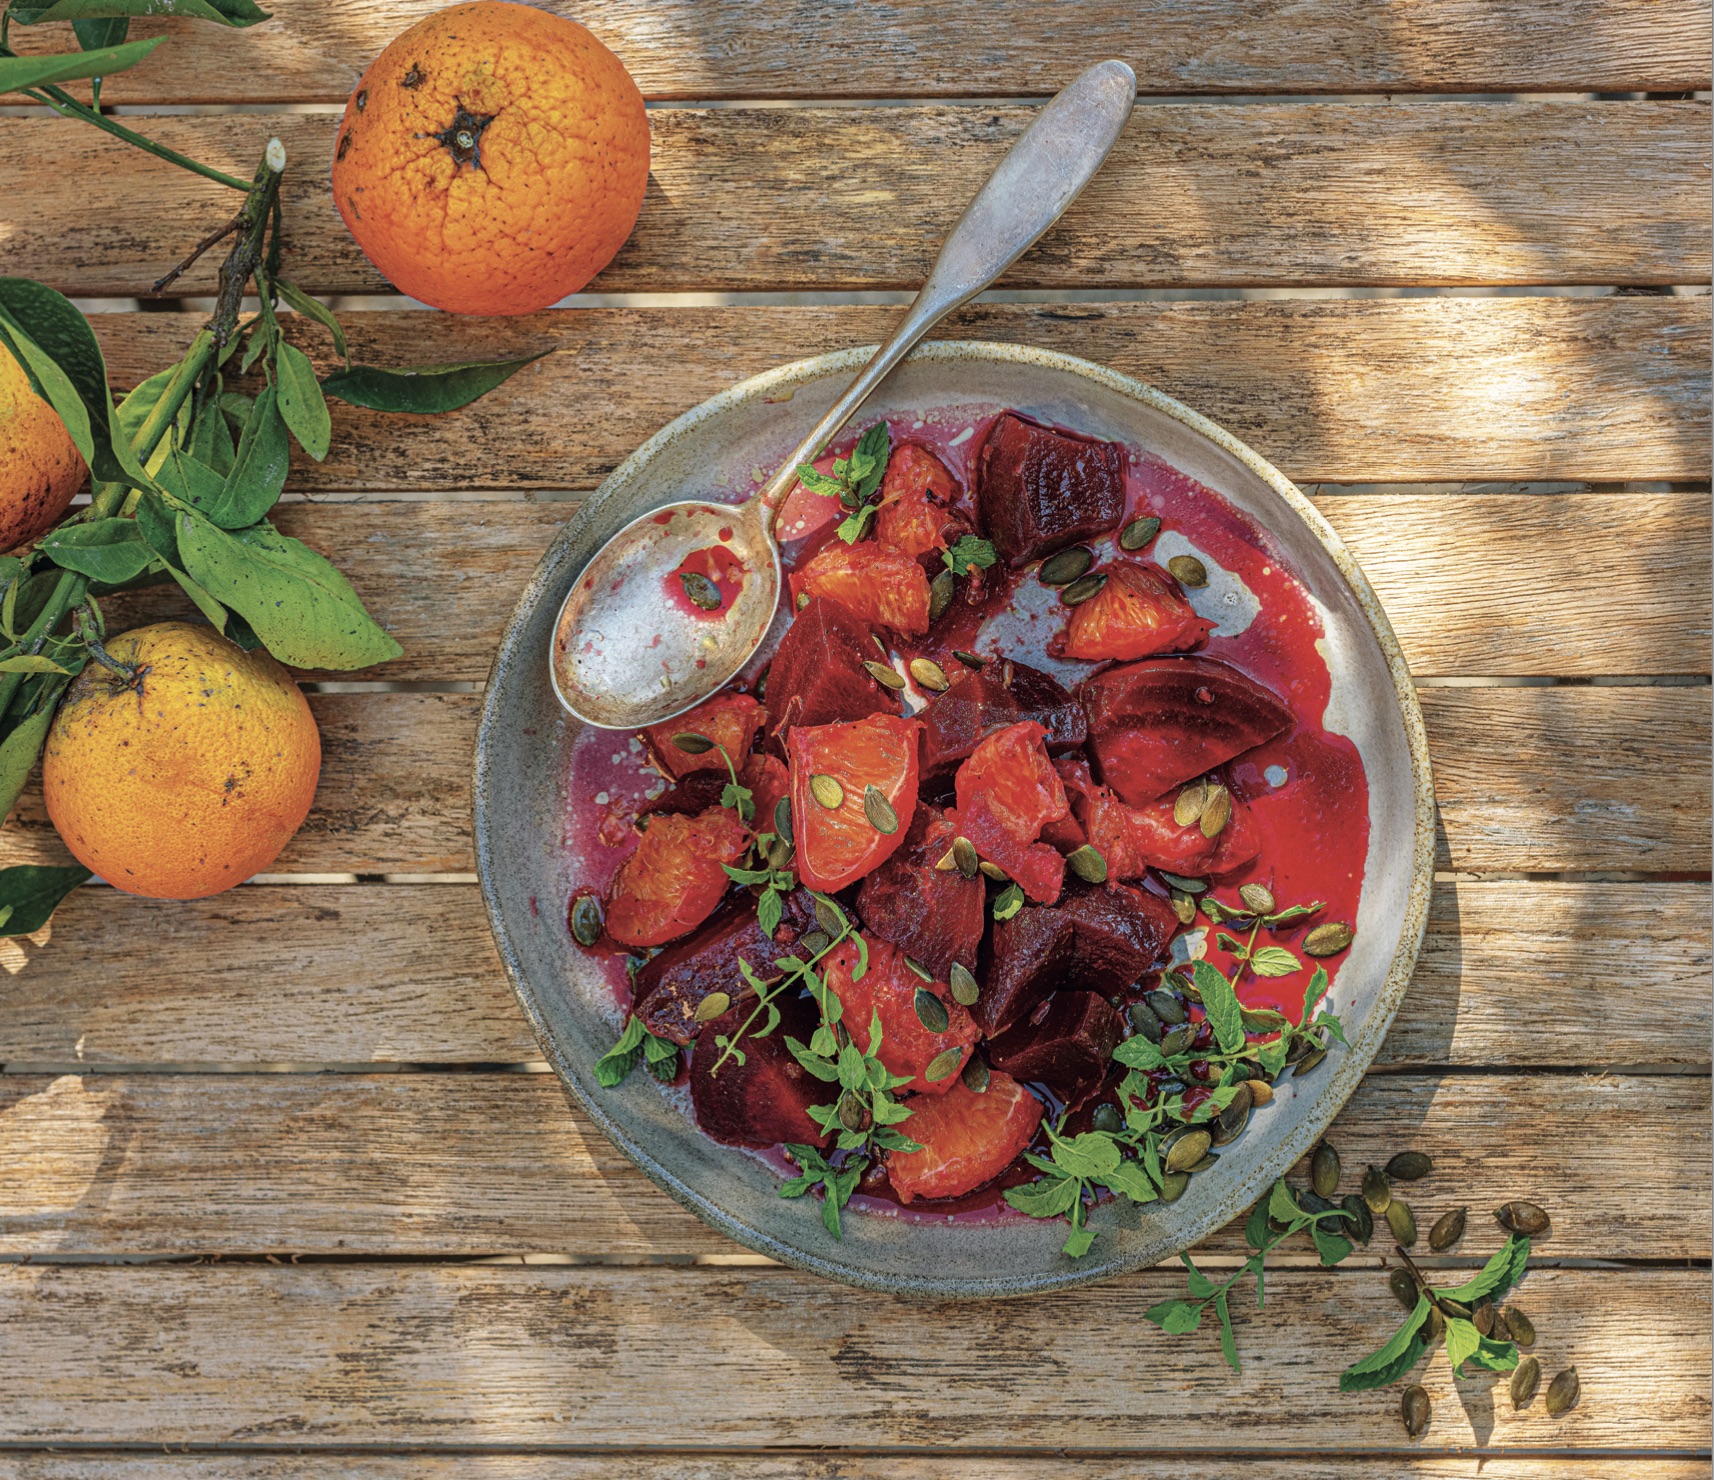 PHOTO: A vibrant beet and orange salad from "Sea, Salt and Honey."